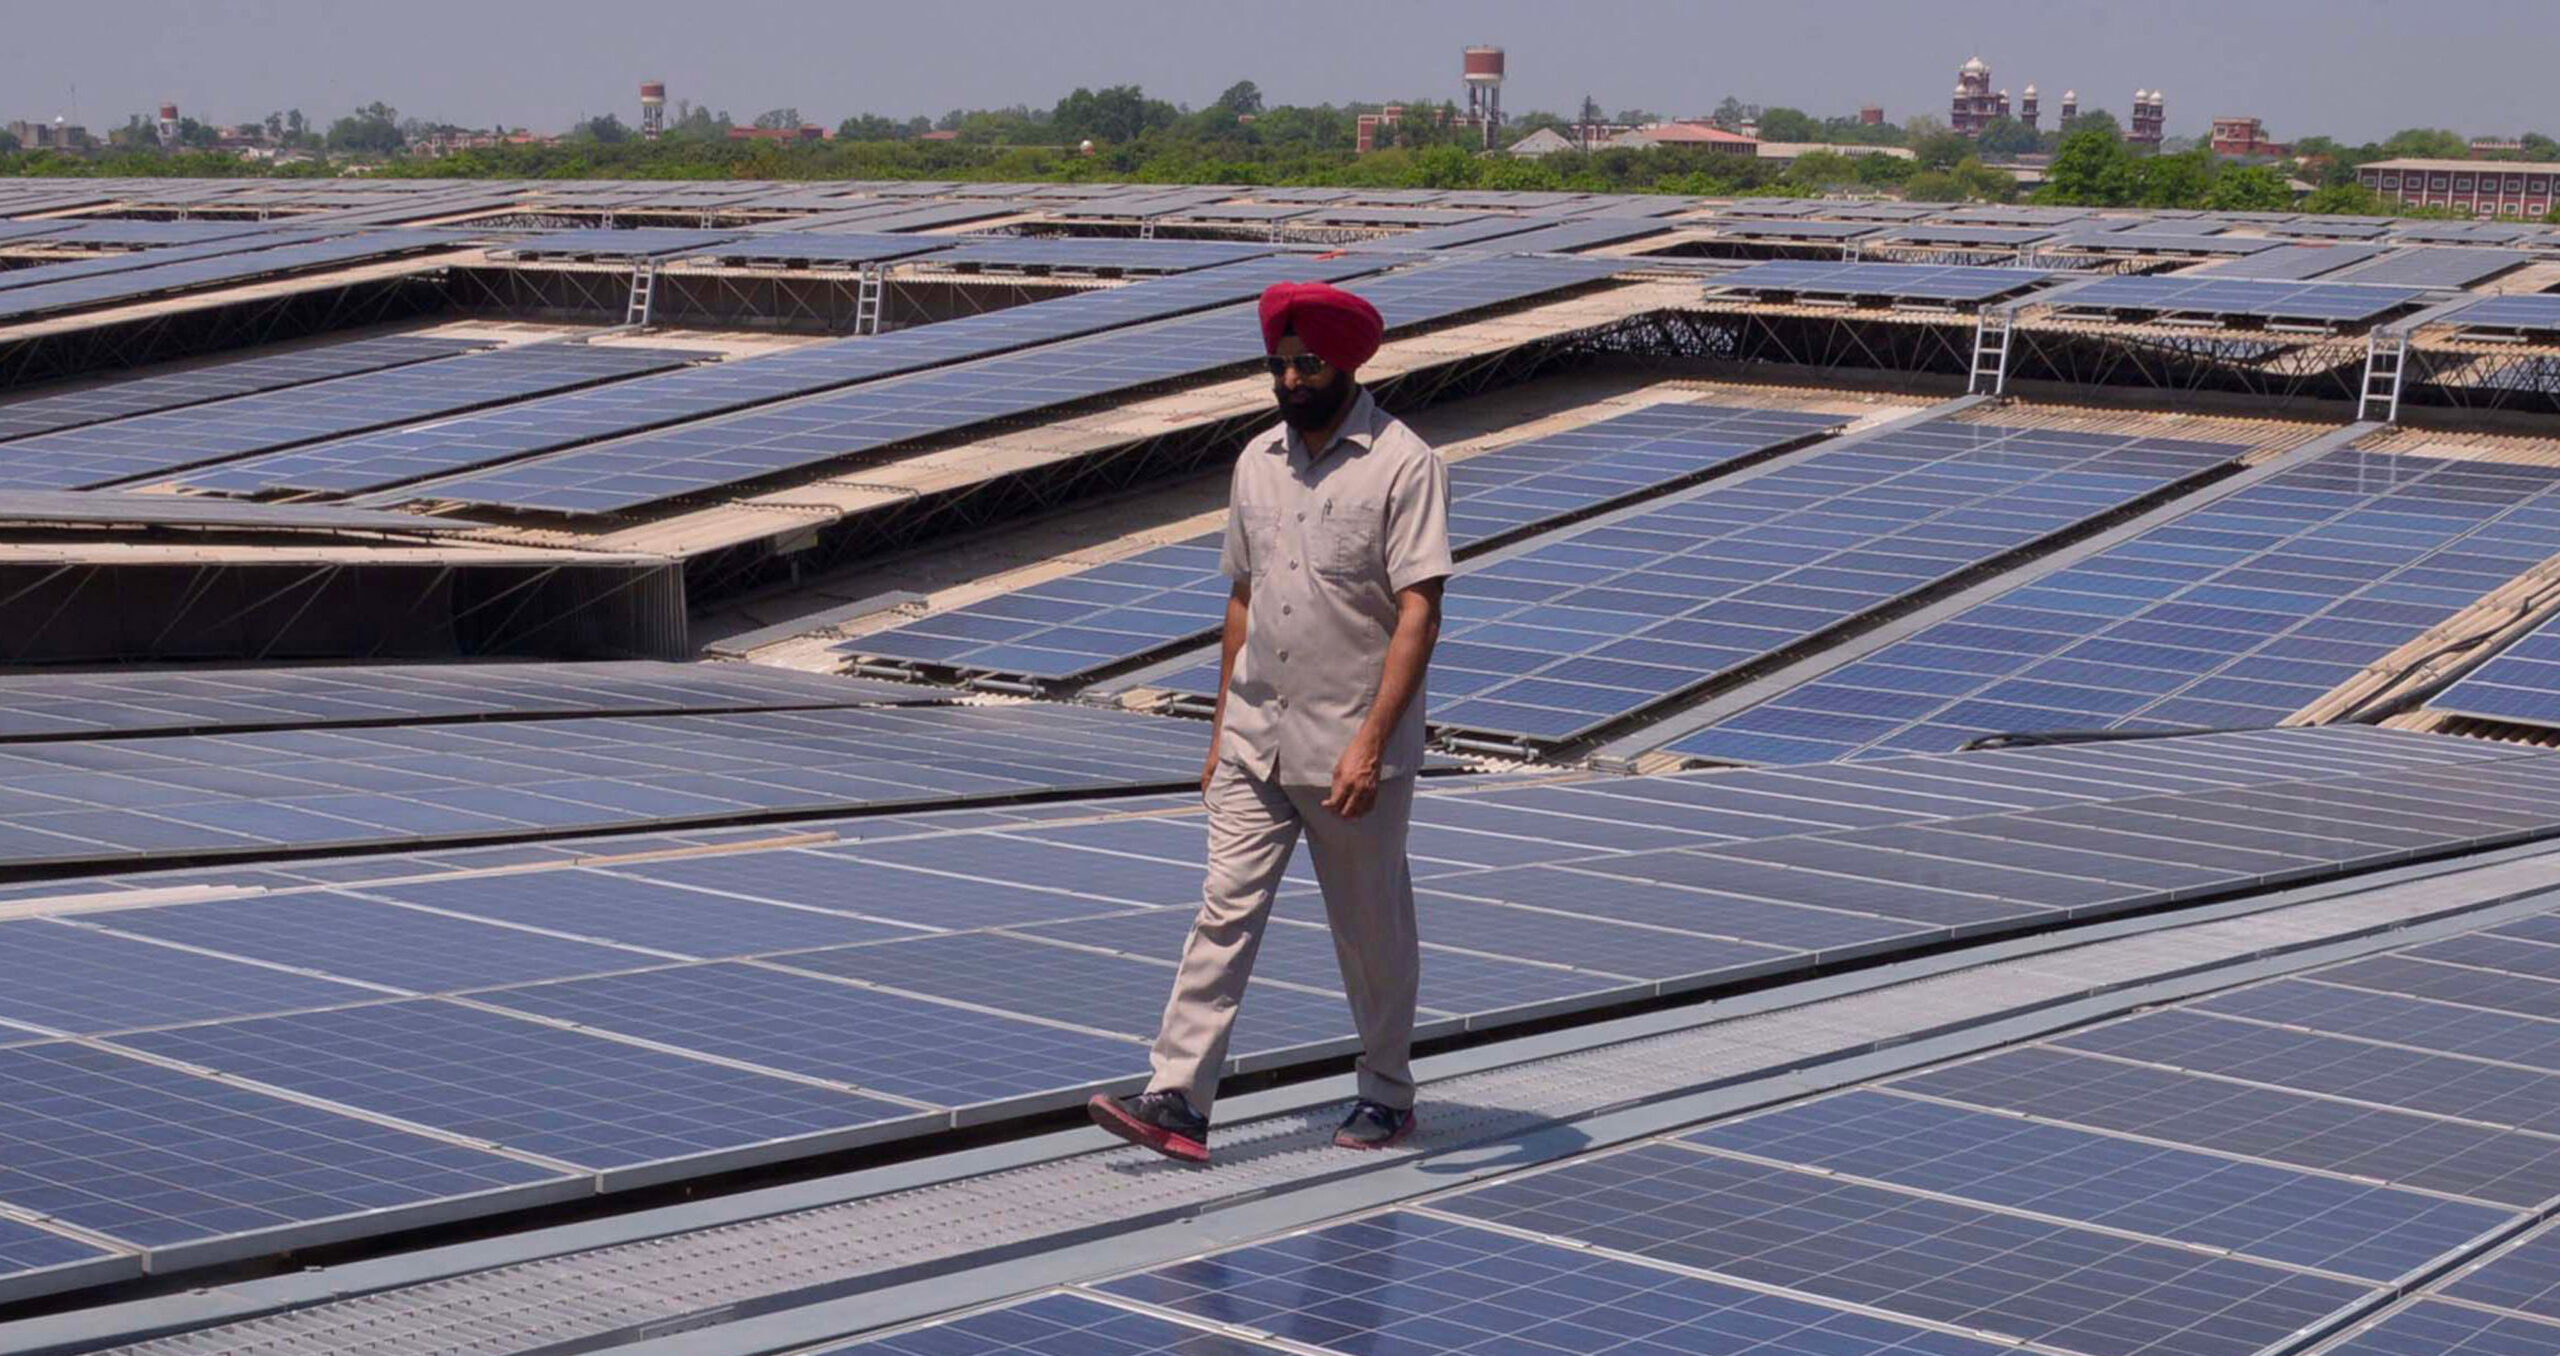 The Solar Photovoltaic Power Plant, some 45kms from Amritsar. Significant investment will be needed if emerging markets are to achieve climate goals. (Photo by NARINDER NANU / AFP) (Photo by NARINDER NANU/AFP via Getty Images) 